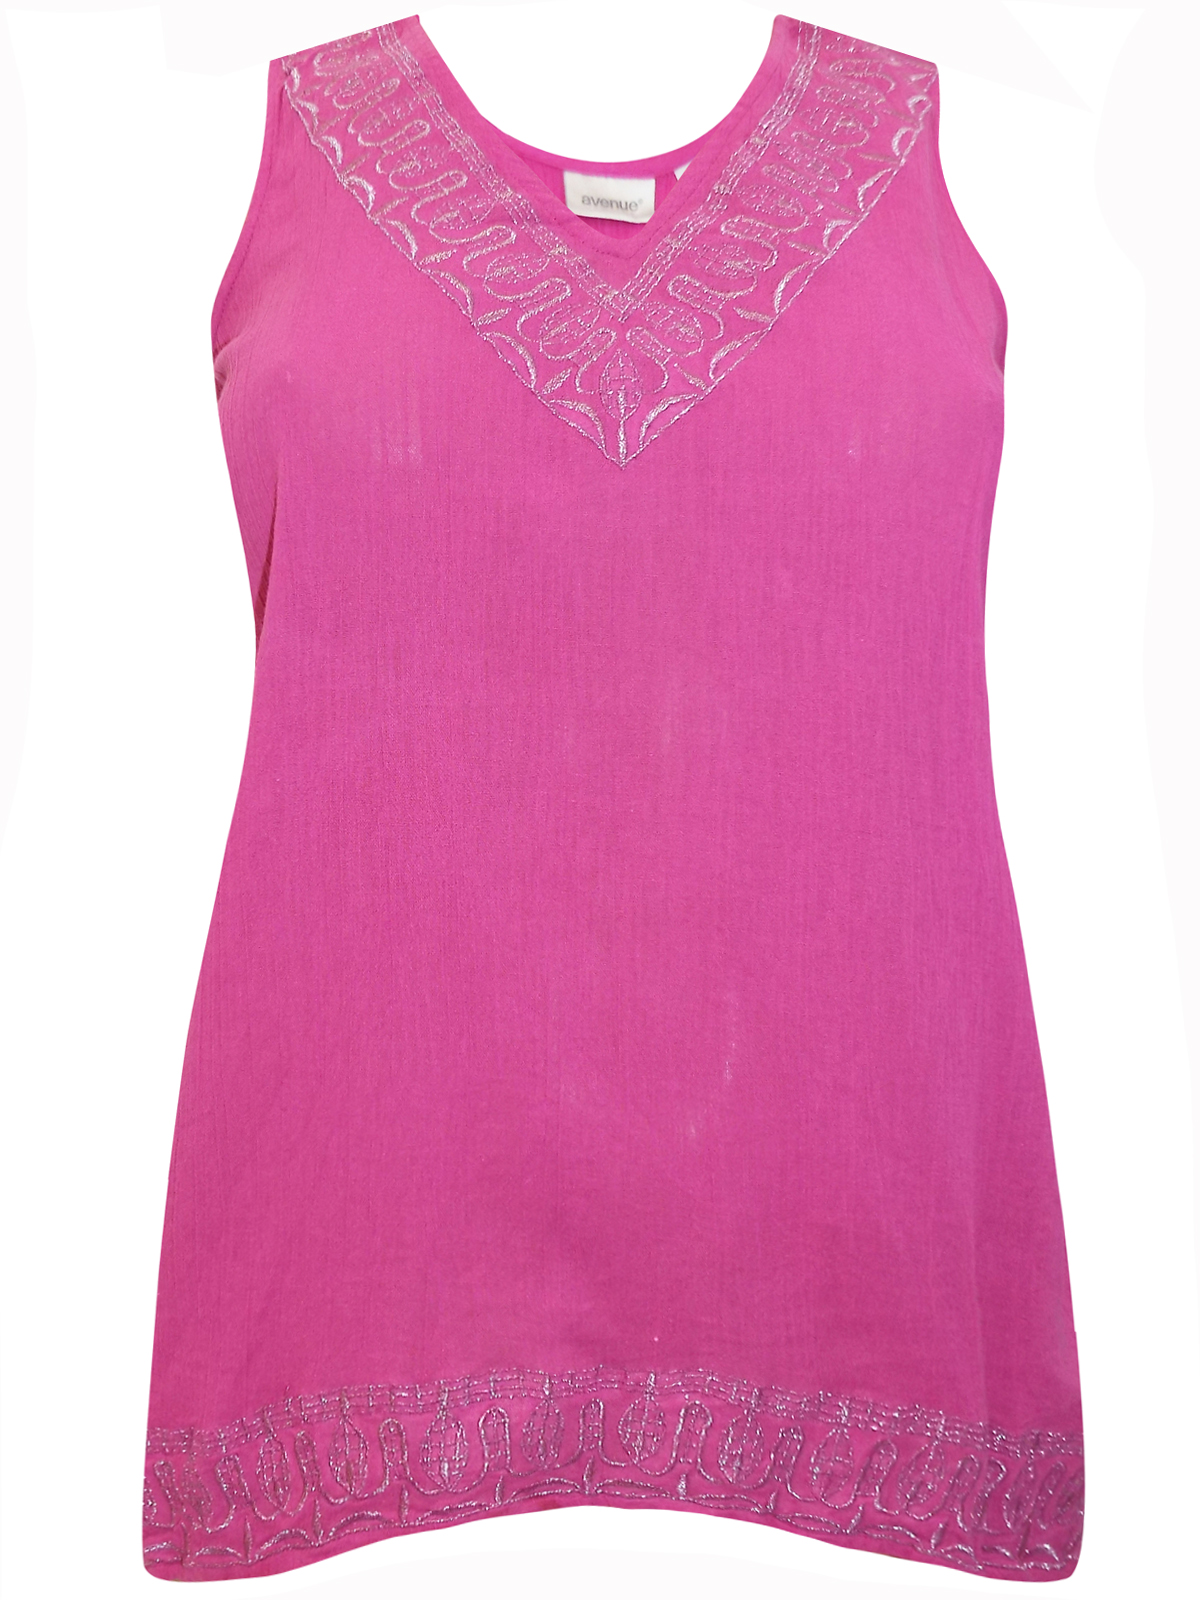 Avenue PINK Sleeveless Embroidered Trim Crinkle Cotton Top - Plus Size ...